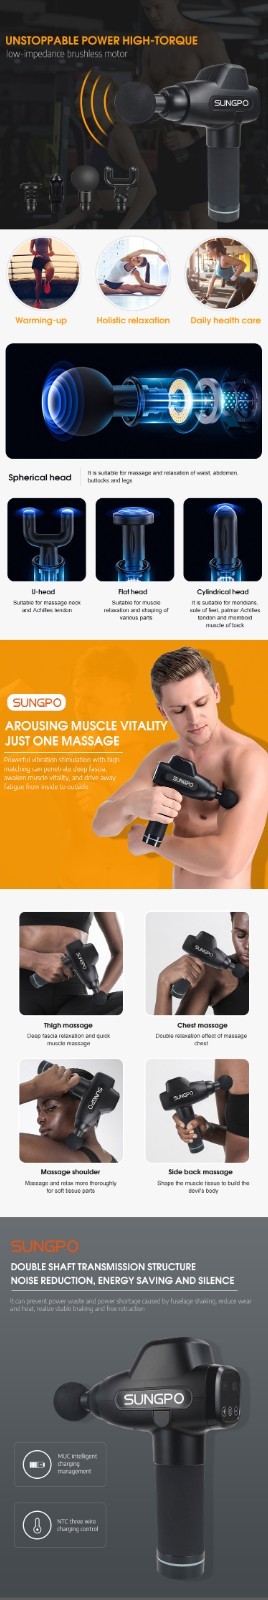 SUNGPO professional power massager manufacturer for relax